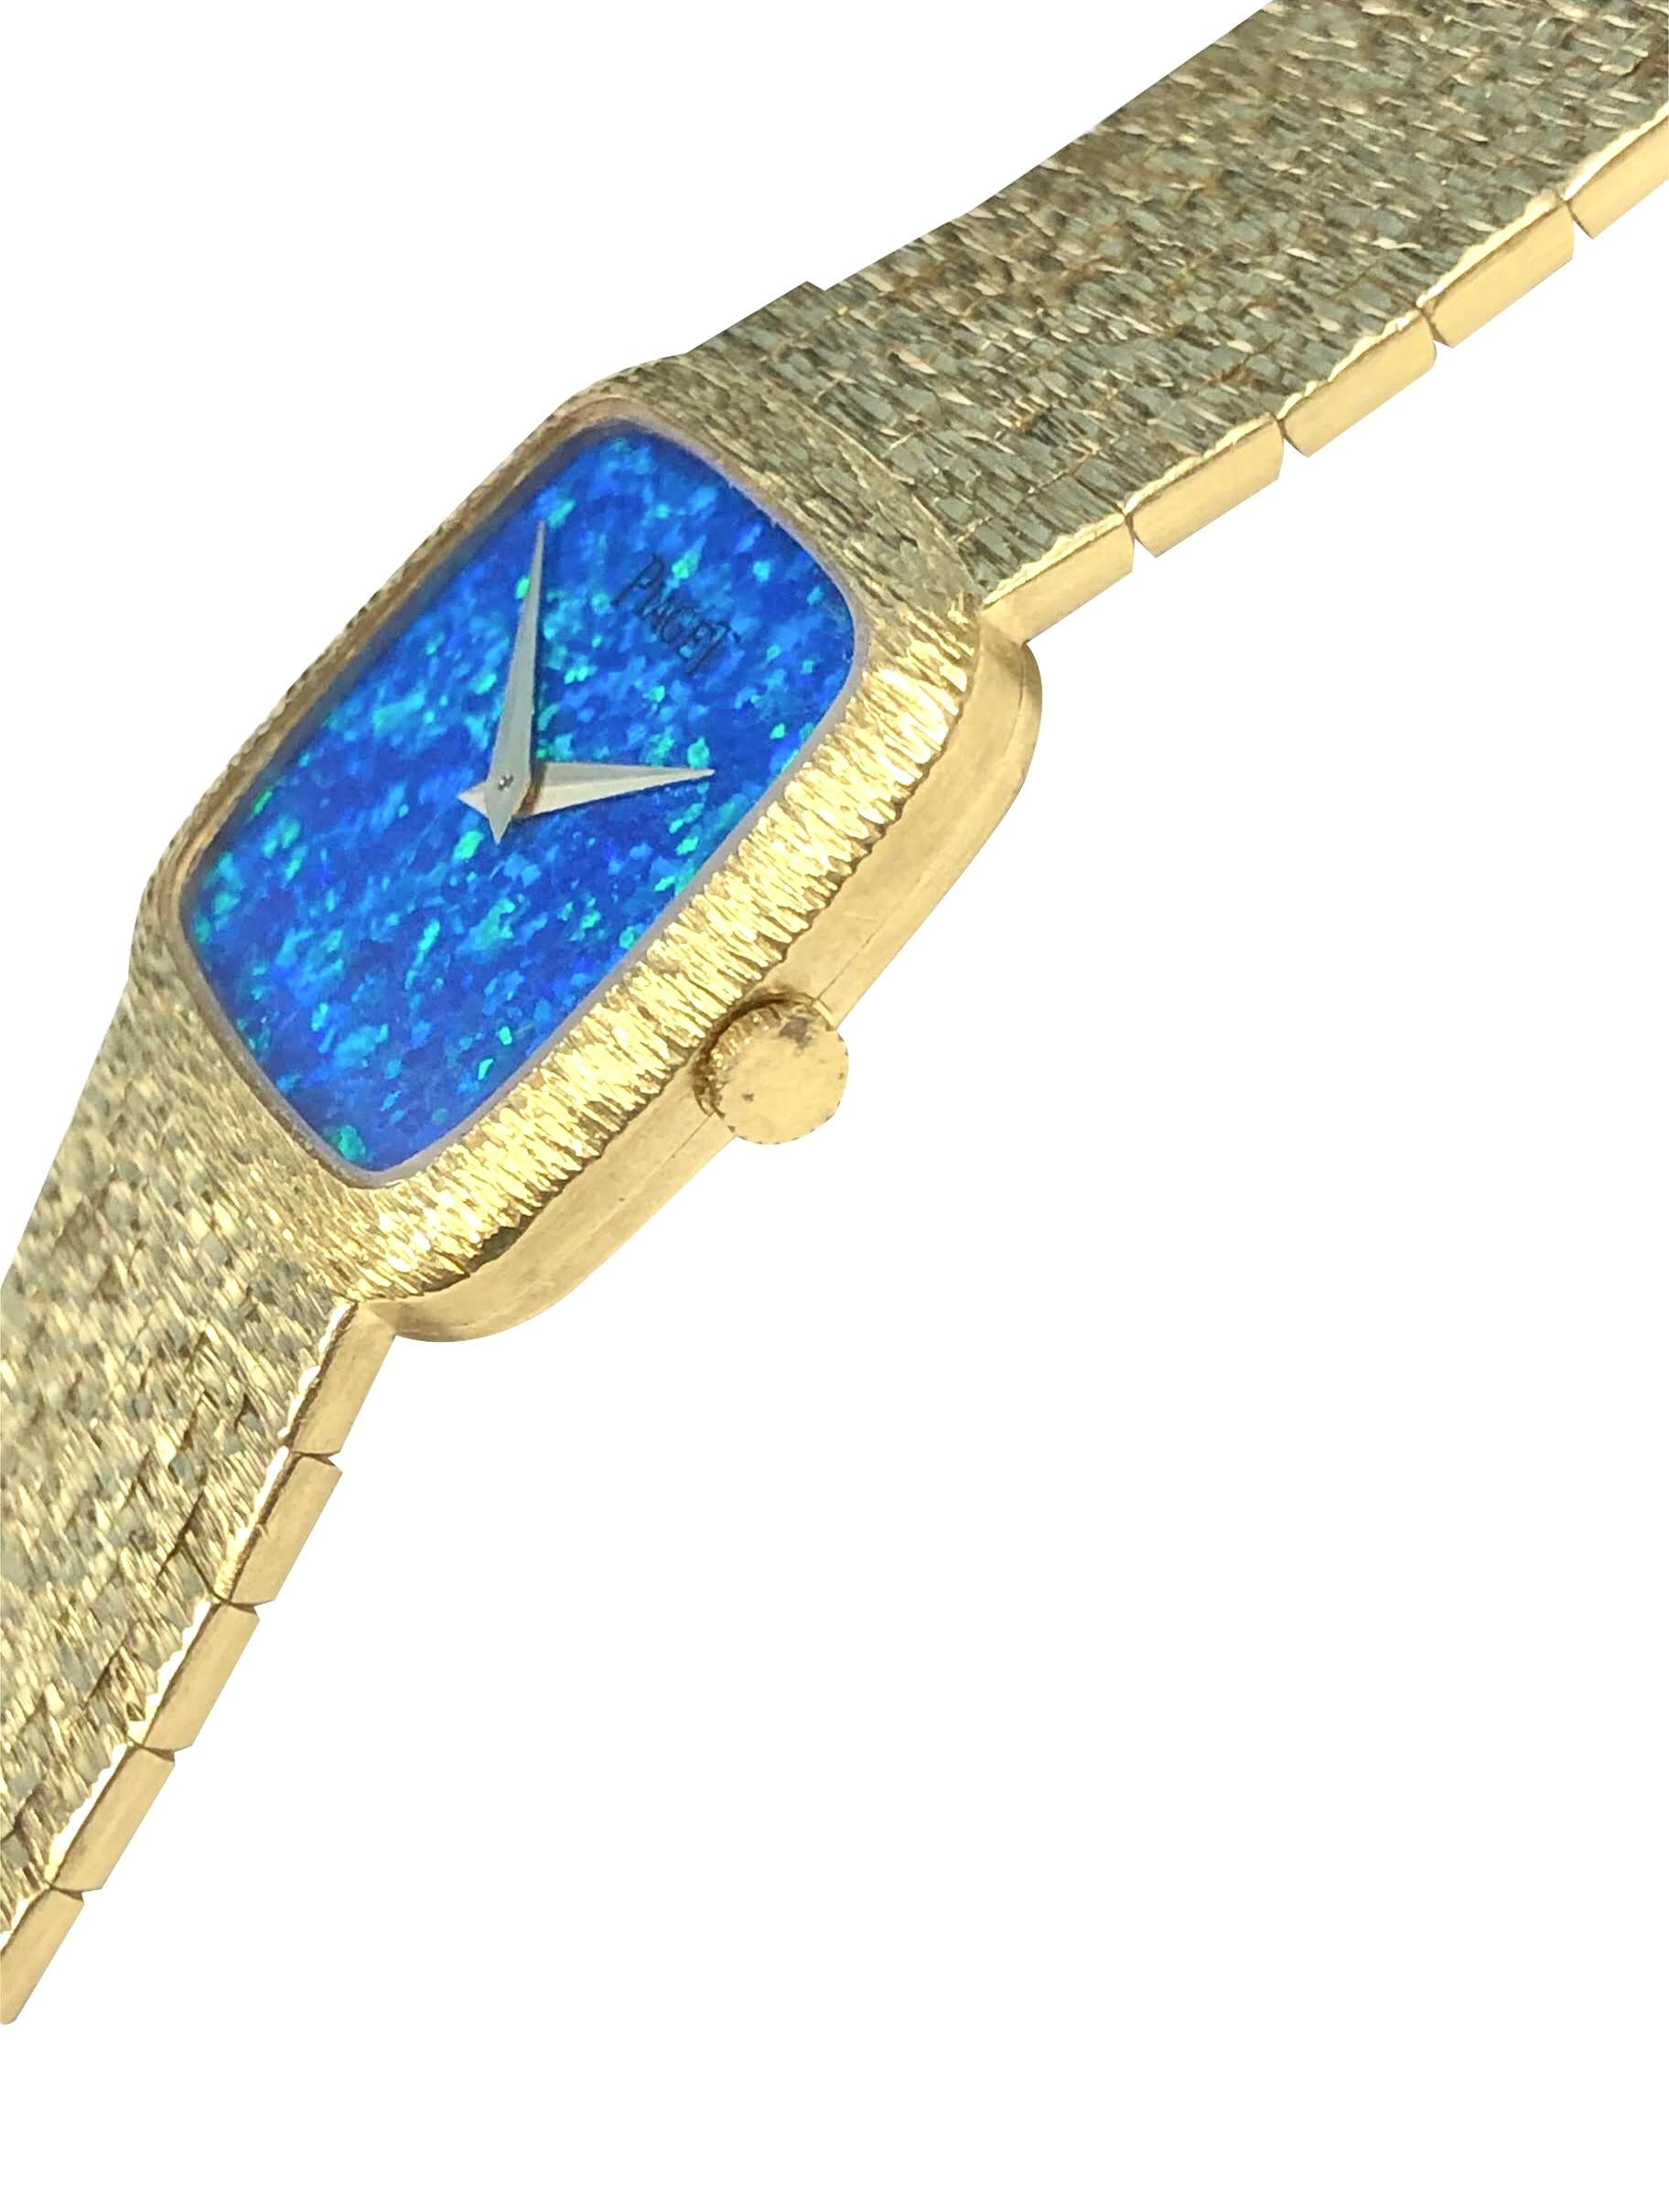 Circa 1980 Piaget Ladies Wrist Watch 23 X 23 M.M. Case with light textured finish, 17 Jewel Mechanical, Manual wind movement, Firey Opal dial, Gold hands.  5/8 inch wide textured bracelet measuring 6 1/4 inches in length. Recently serviced and comes